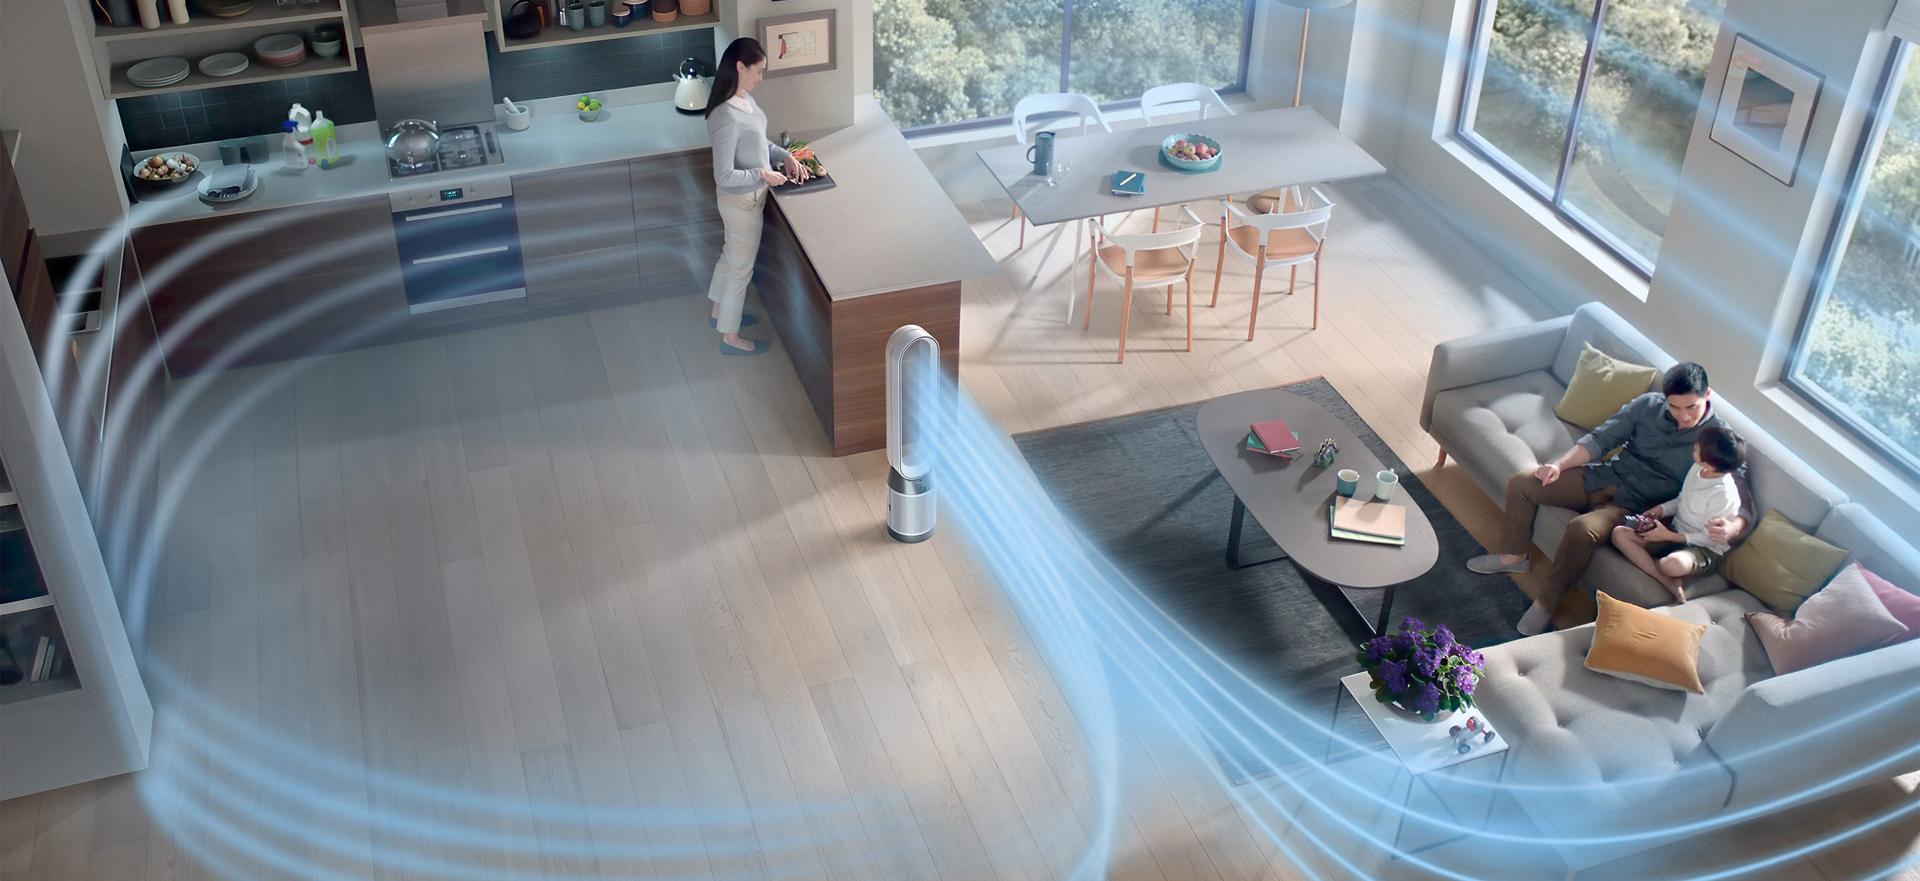 A Dyson purifier purifying a living space